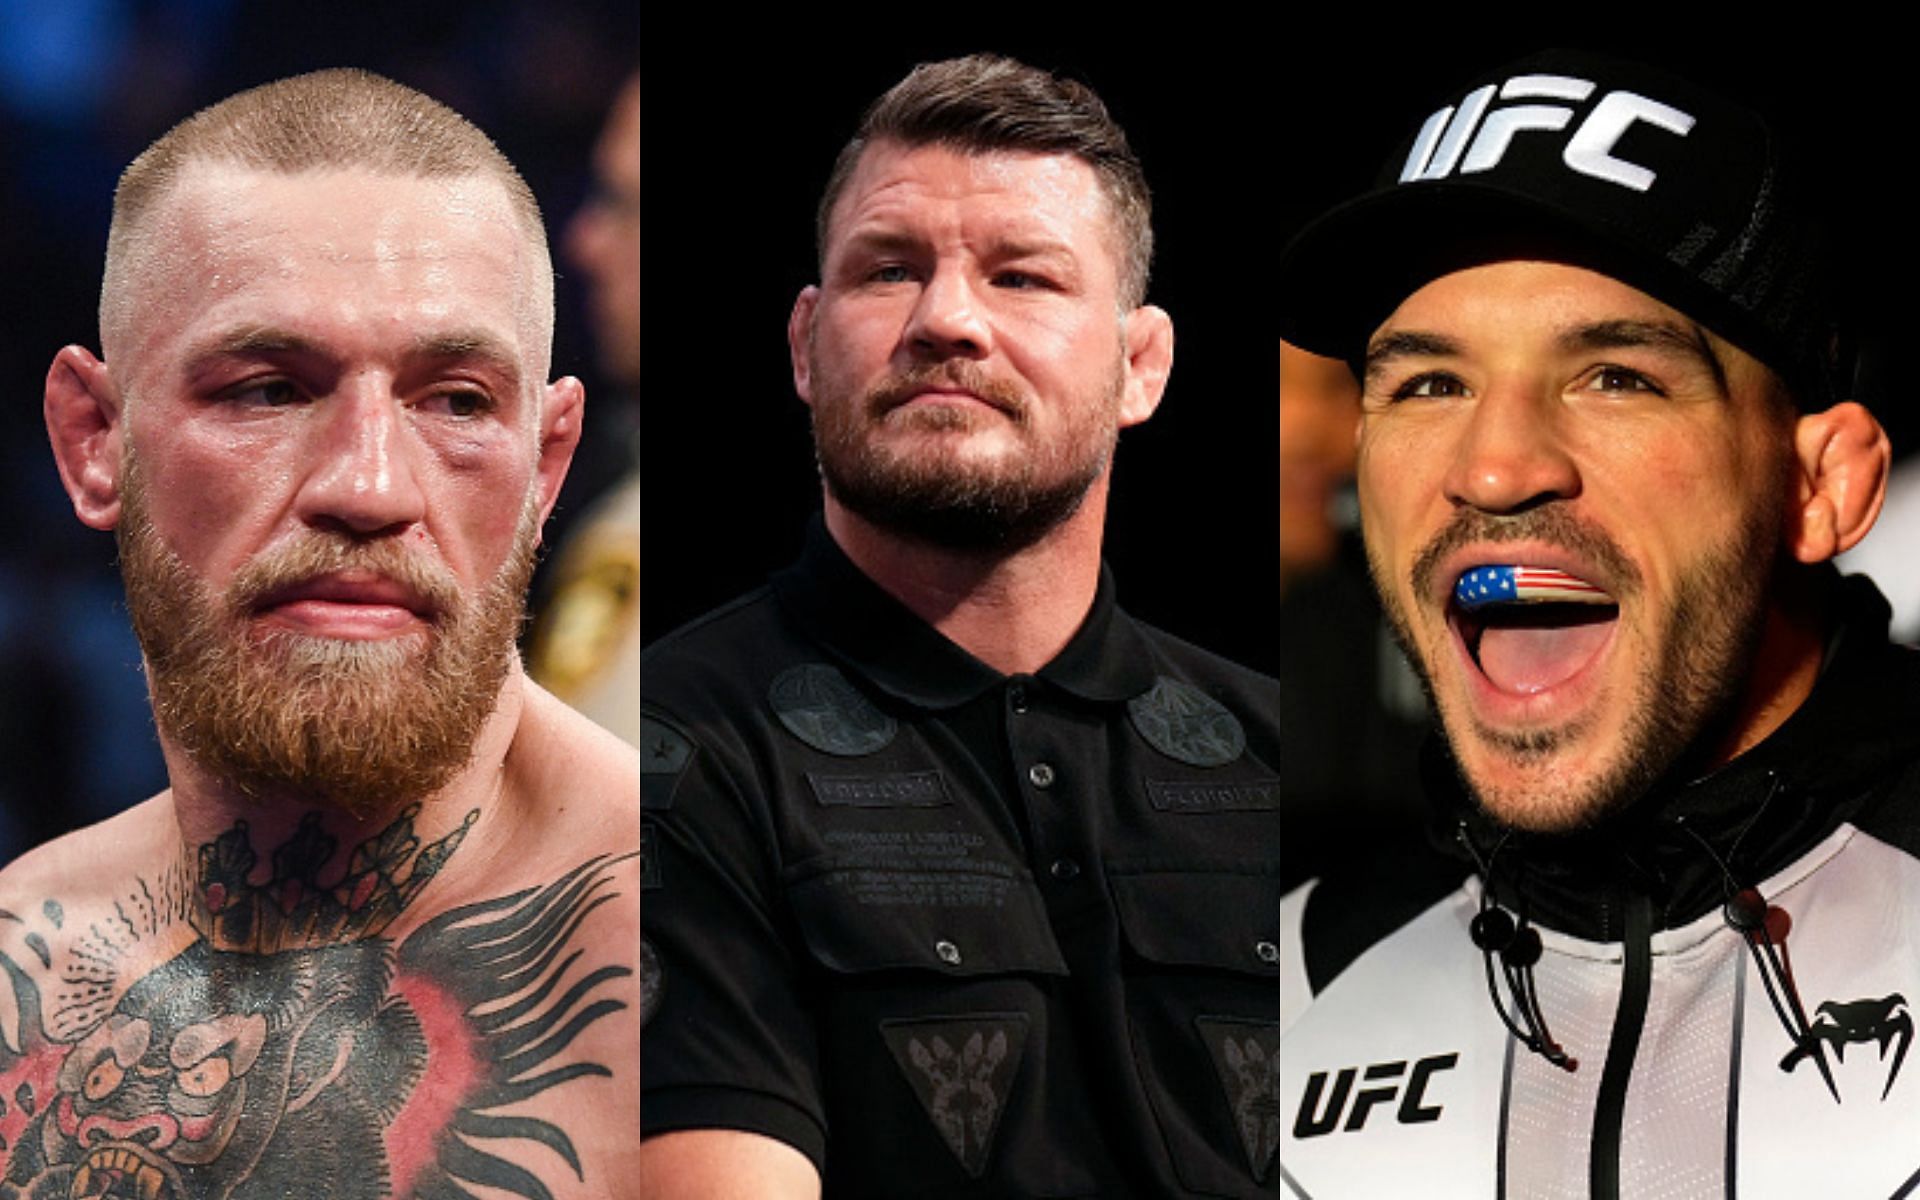 Conor McGregor (left), Michael Bisping (middle), Michael Chandler (right)